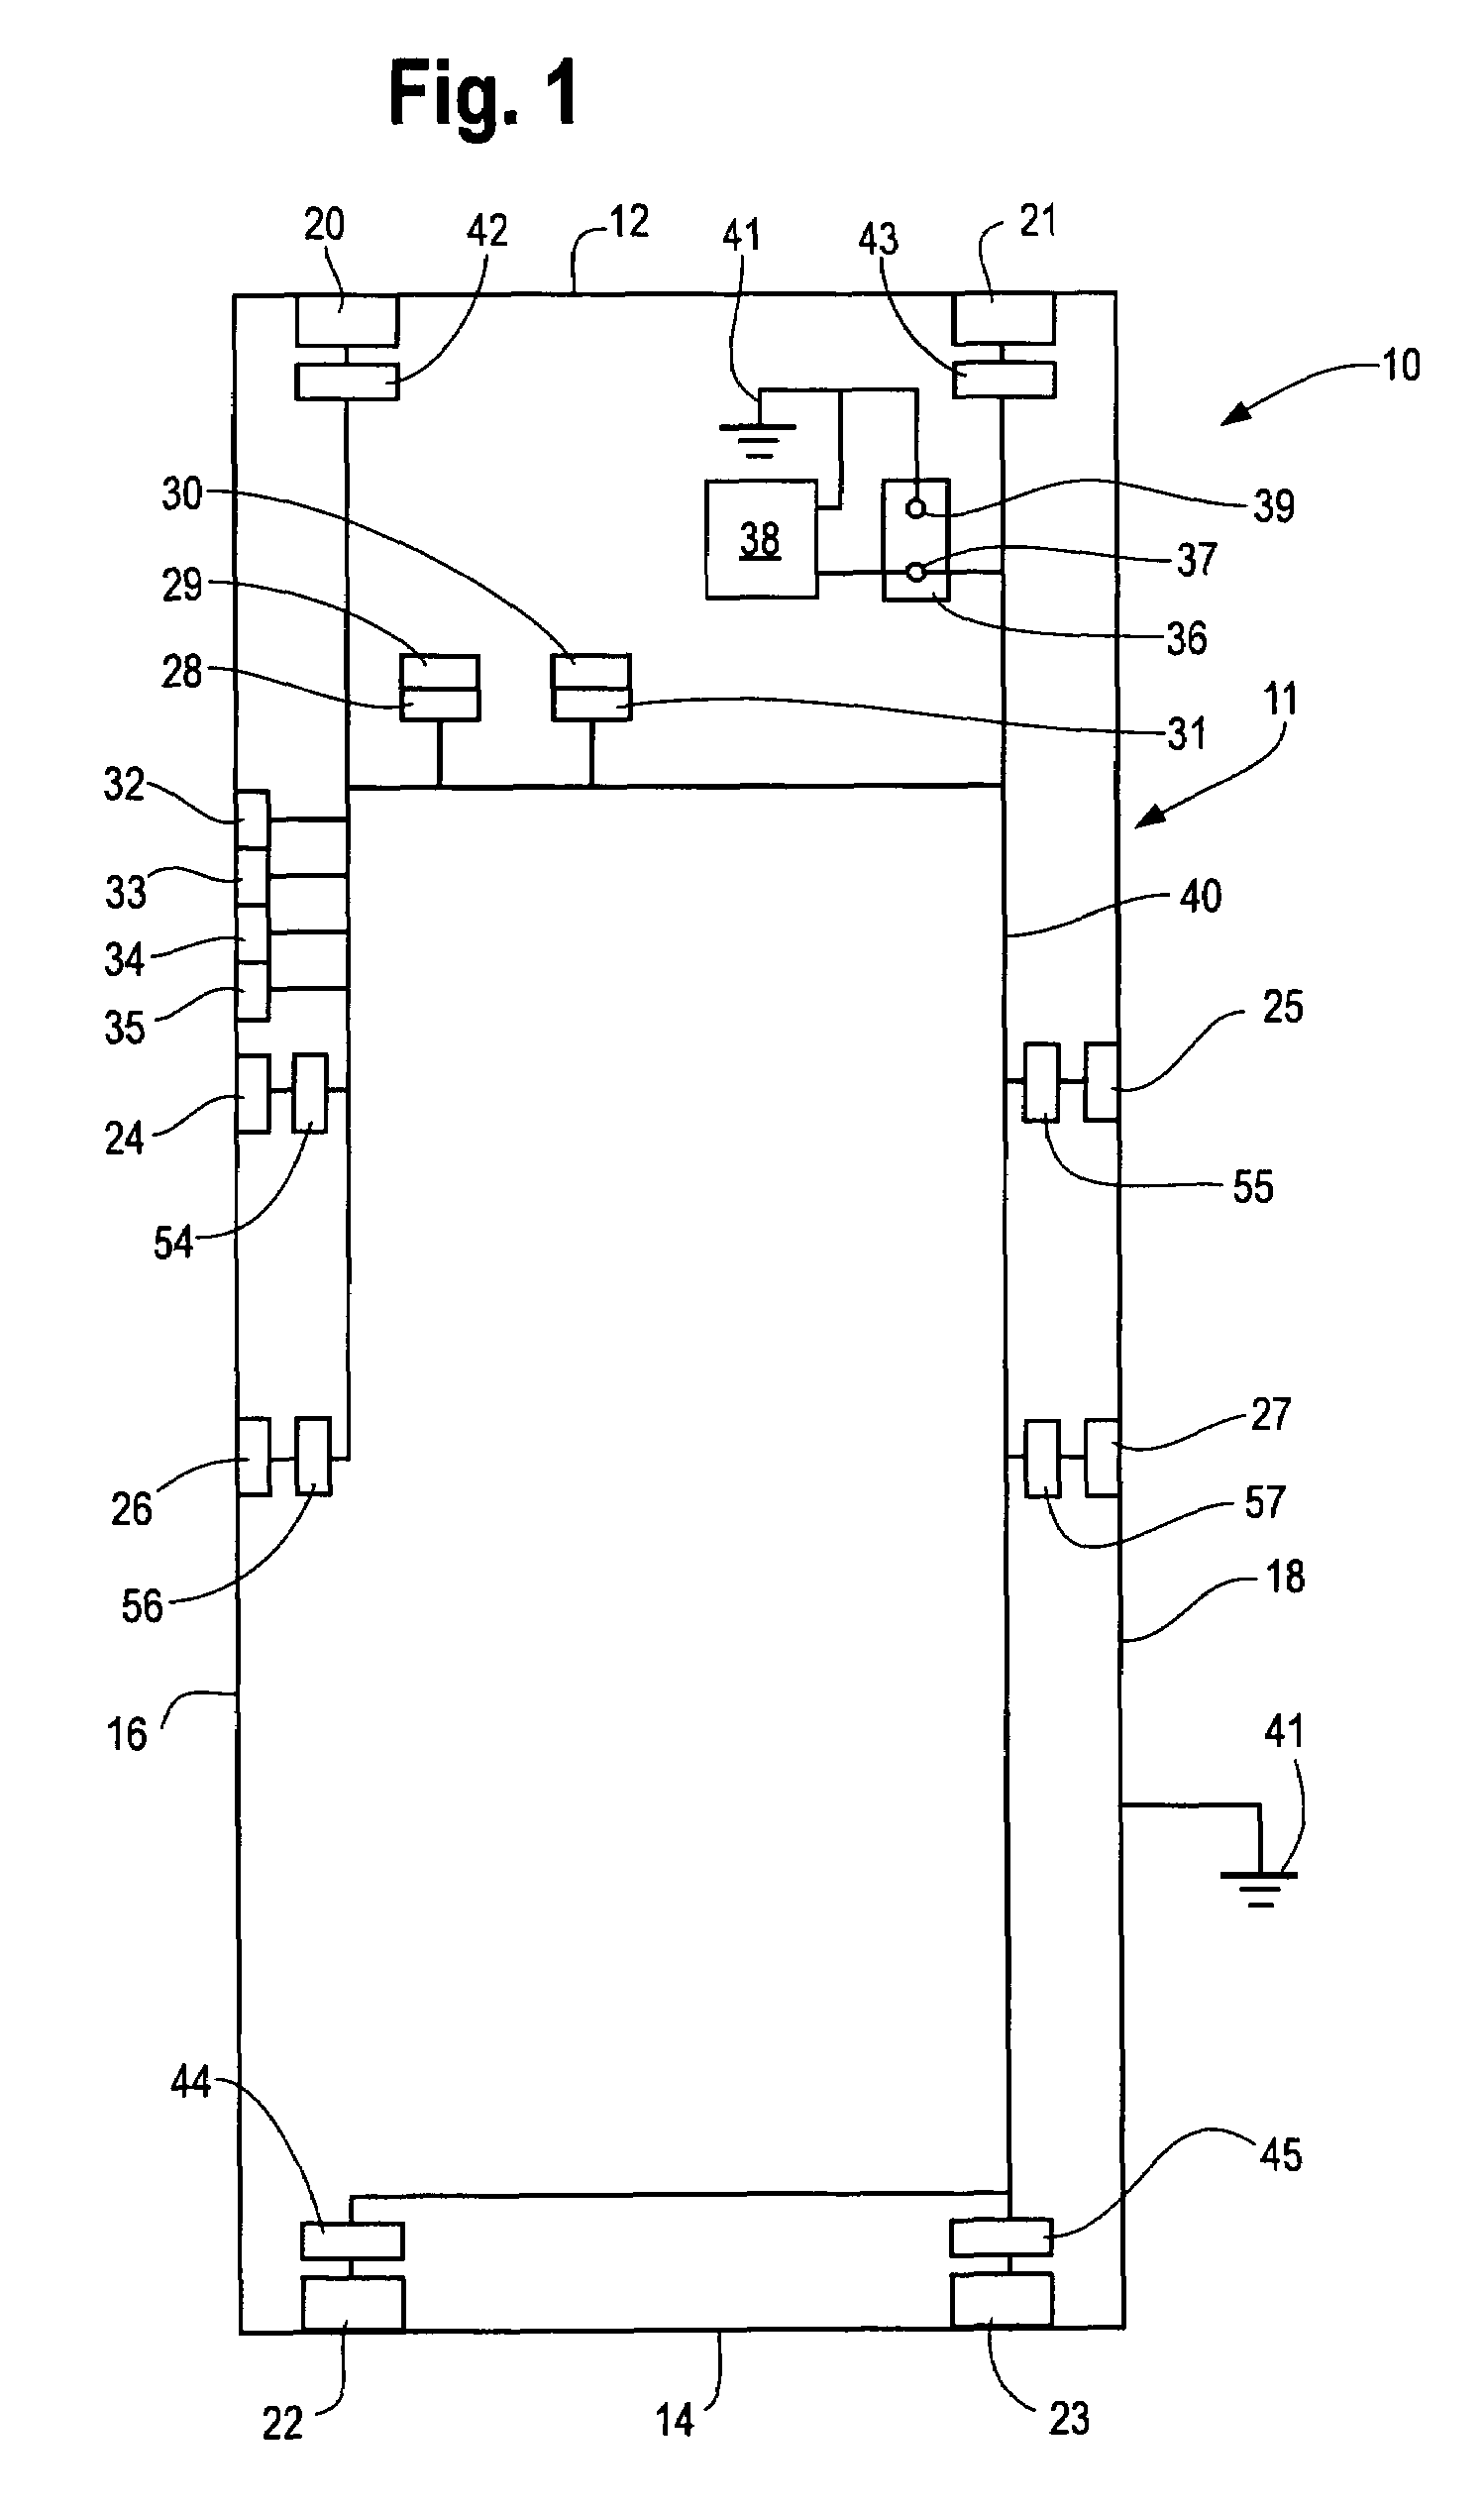 Circuit for reducing the wiring needed to control the functions of a vehicle